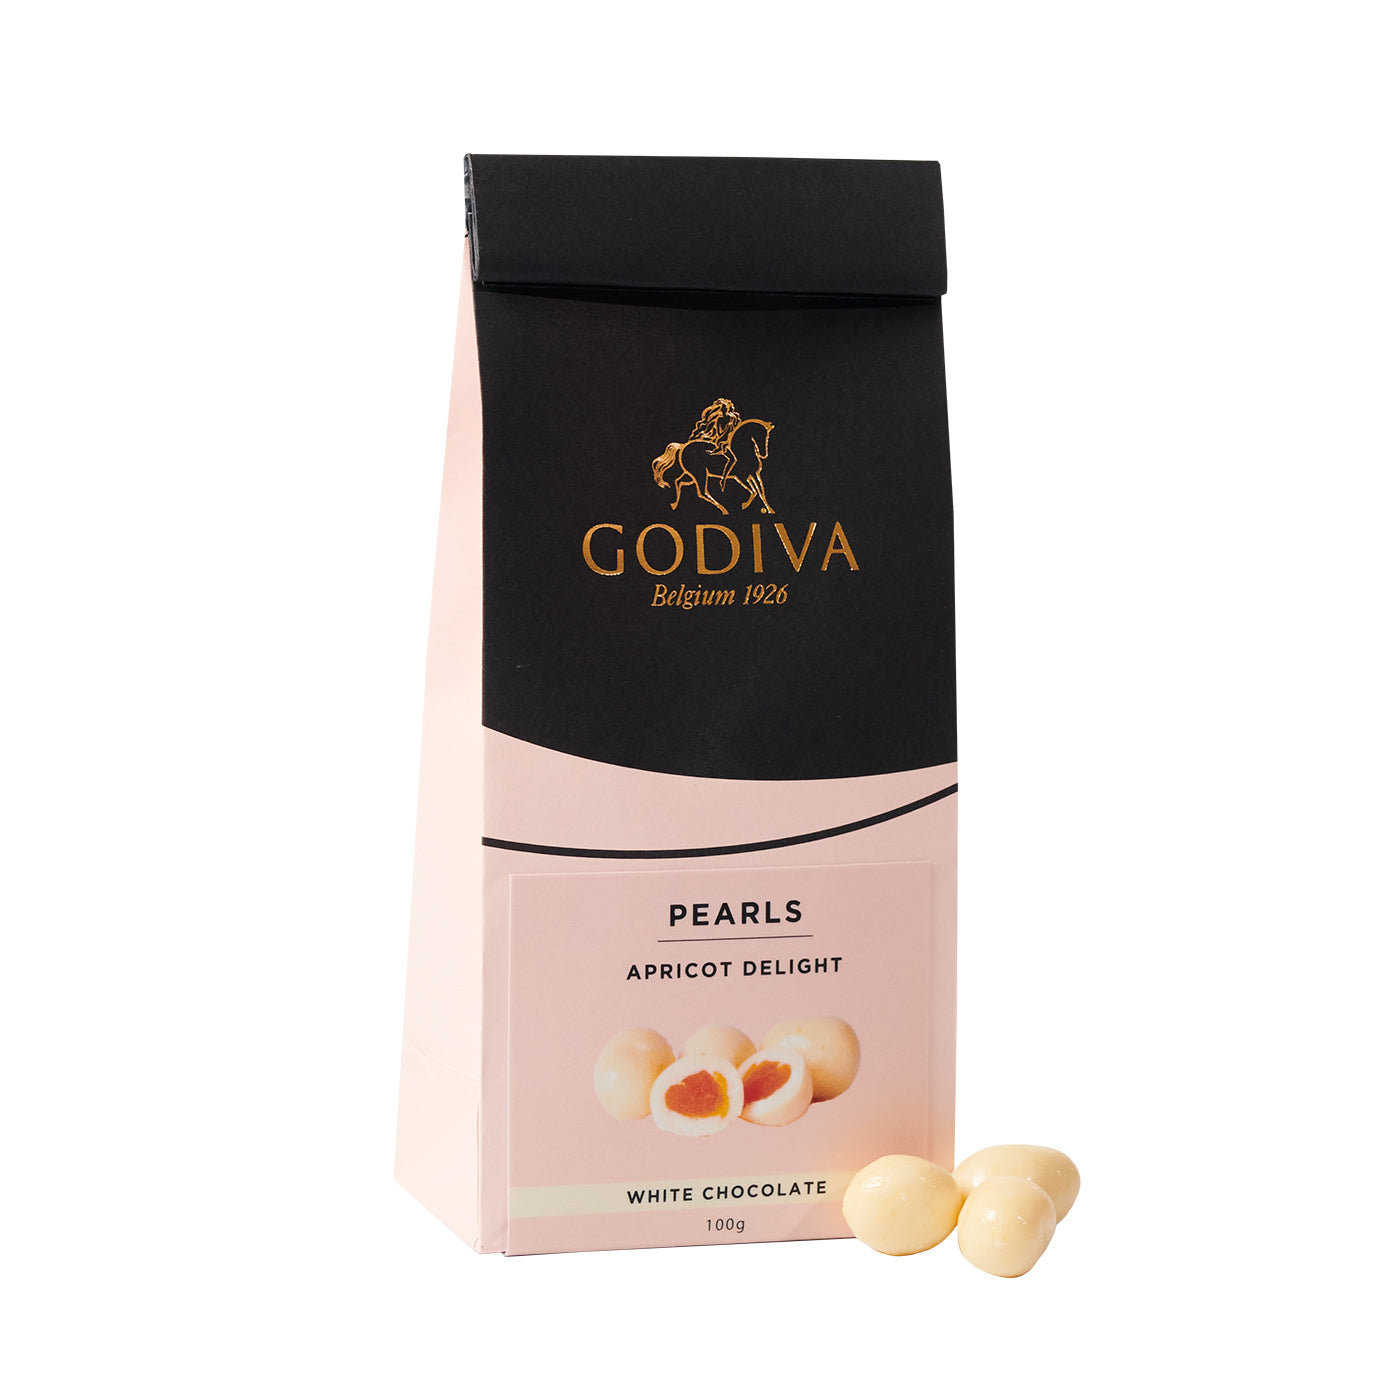 White Chocolate Pearls, Apricot Delight, 100g